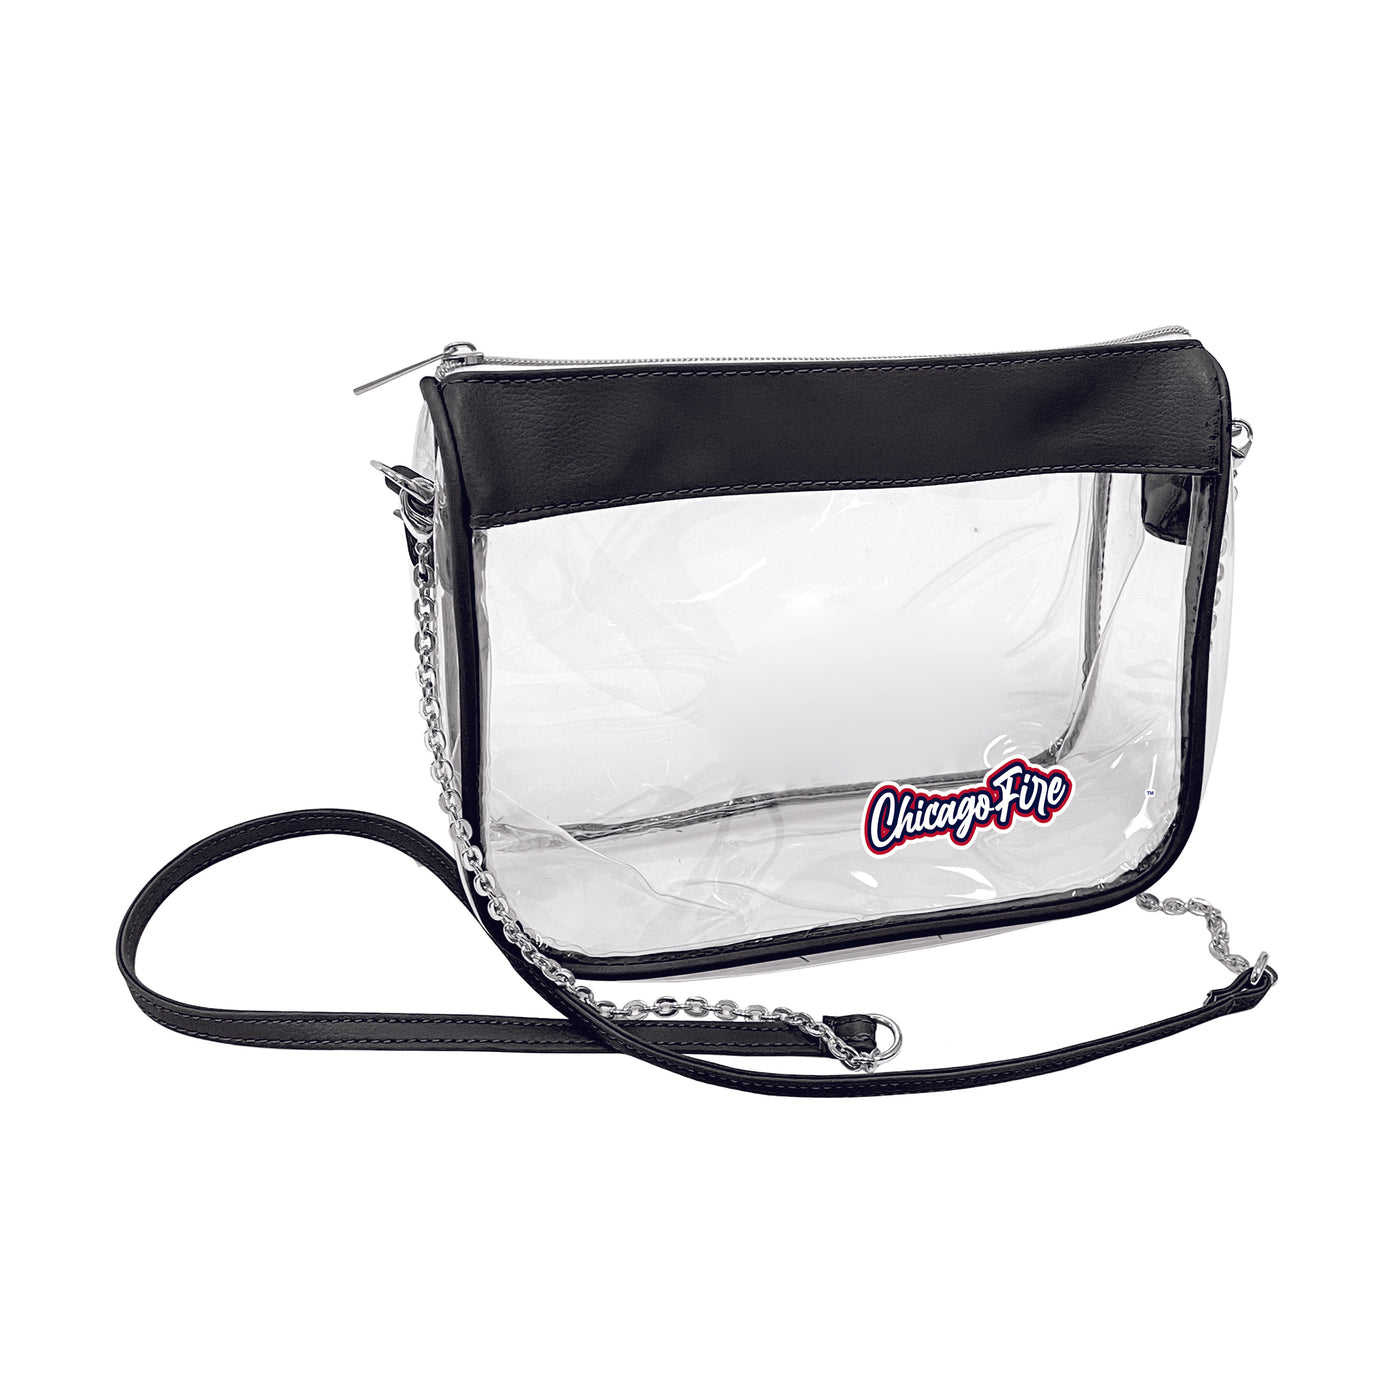 Chicago Fire Hype Clear Bag